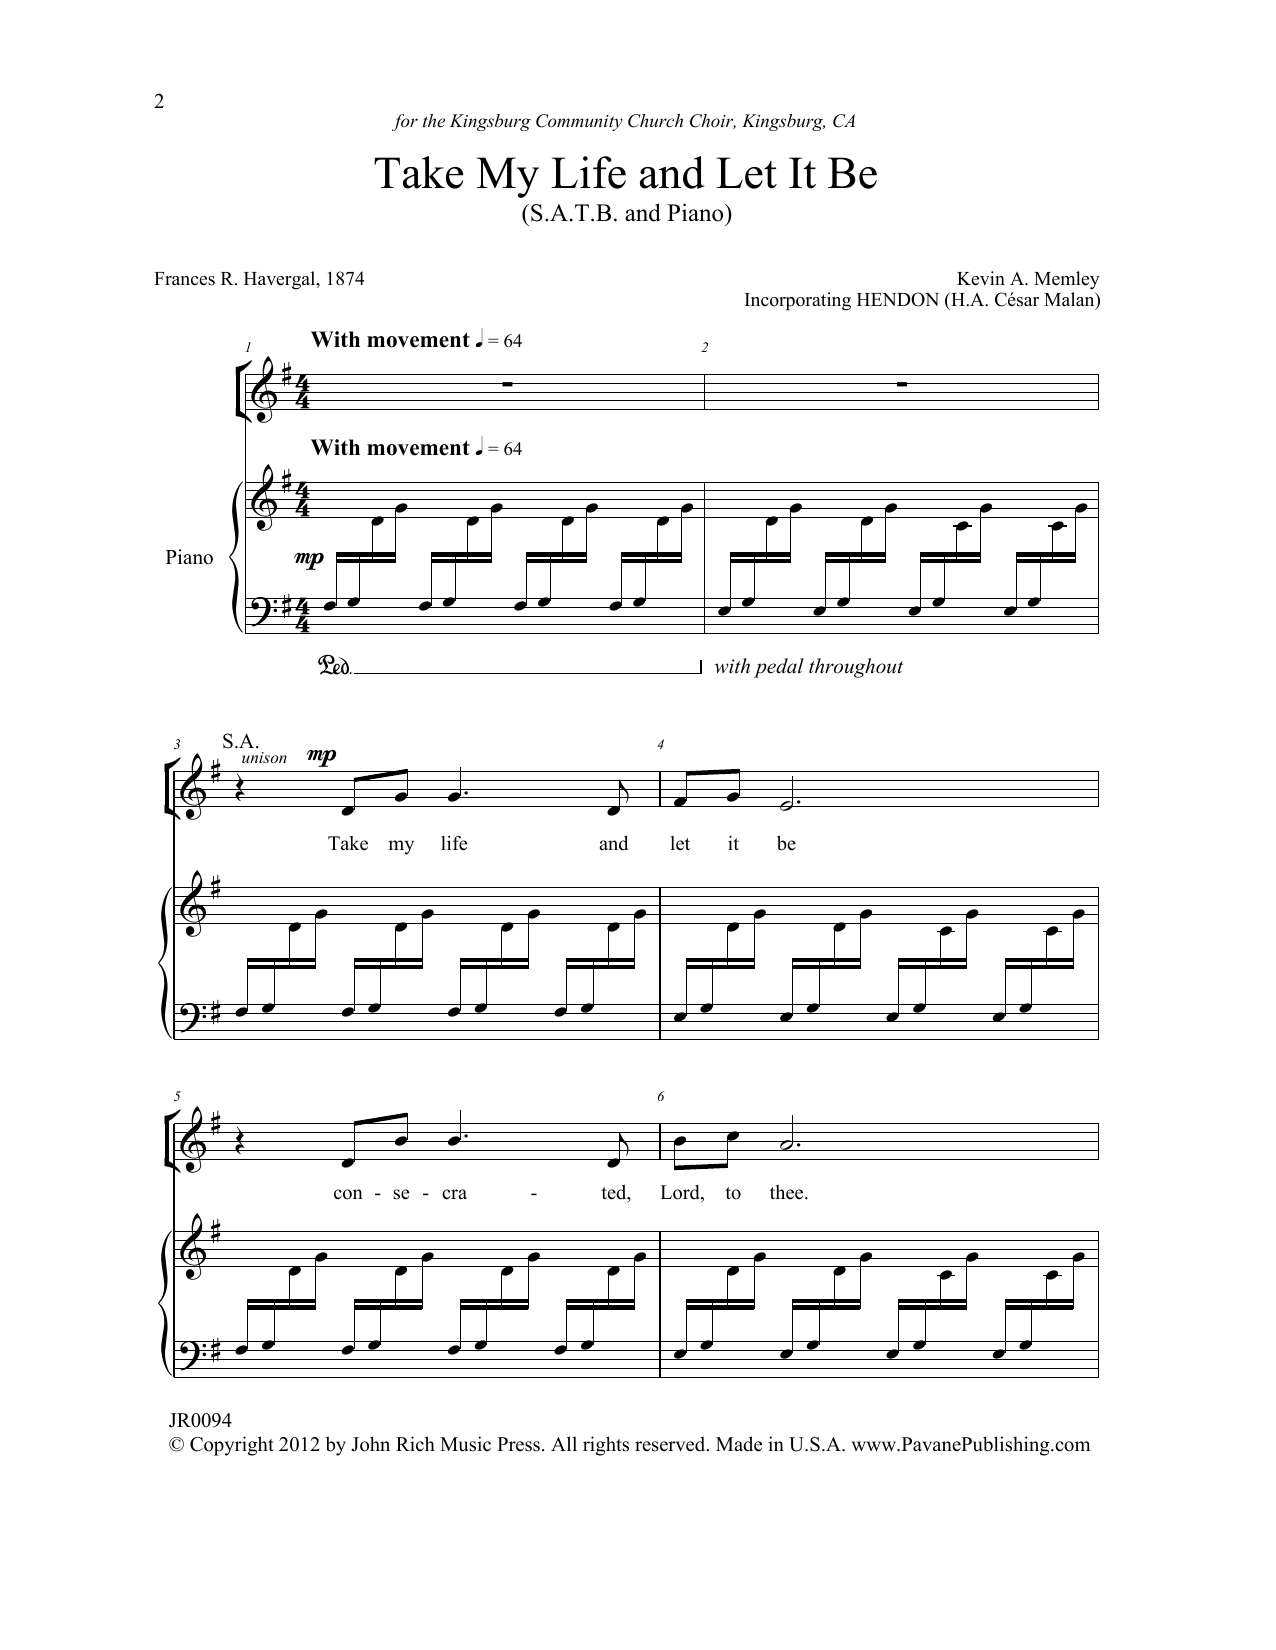 Download Kevin A. Memley Take My Life and Let It Be Sheet Music